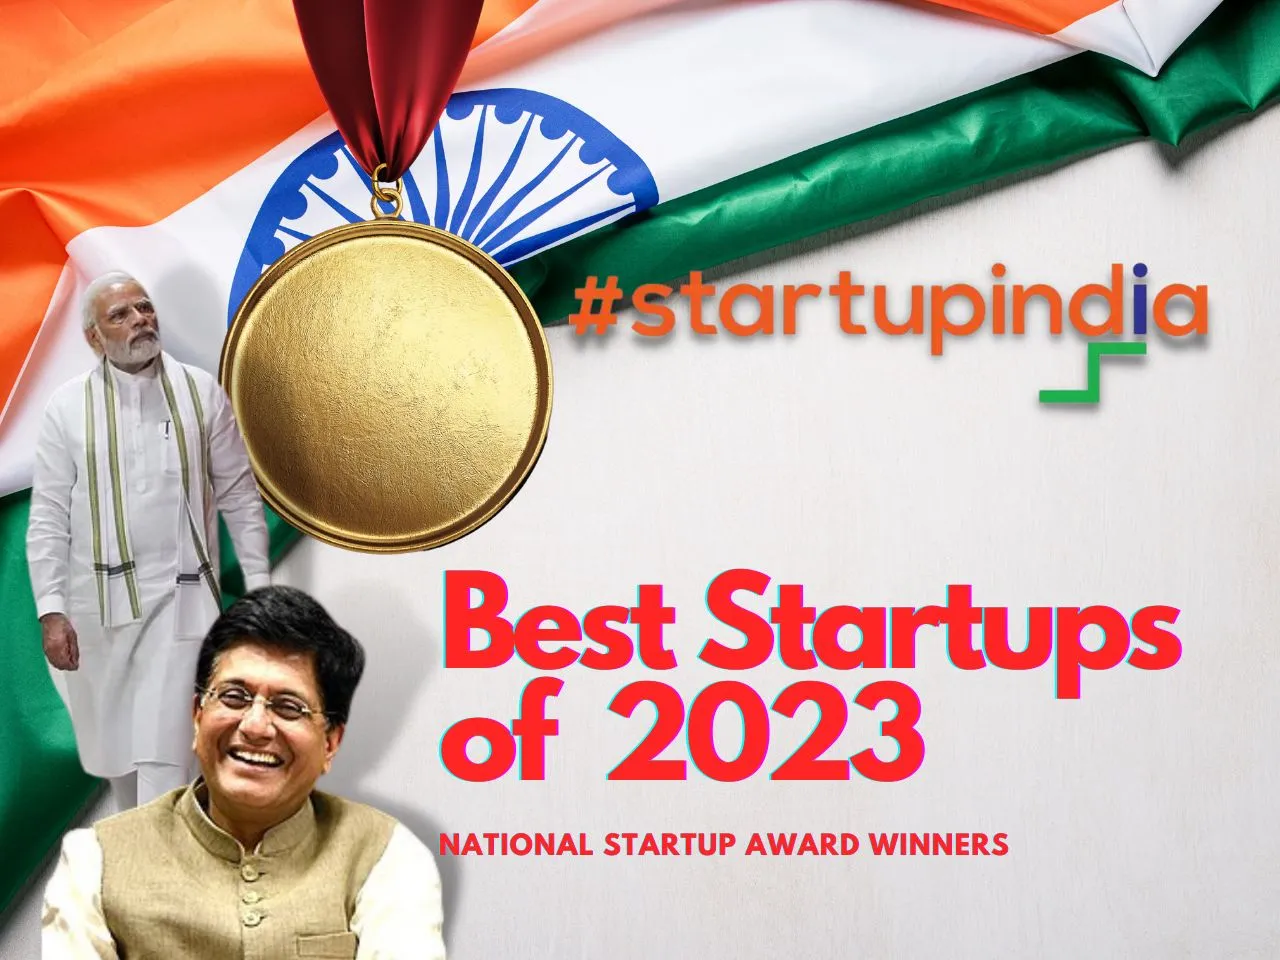 National Startup Award Results 2022 Meet The Top Startups Of 2023